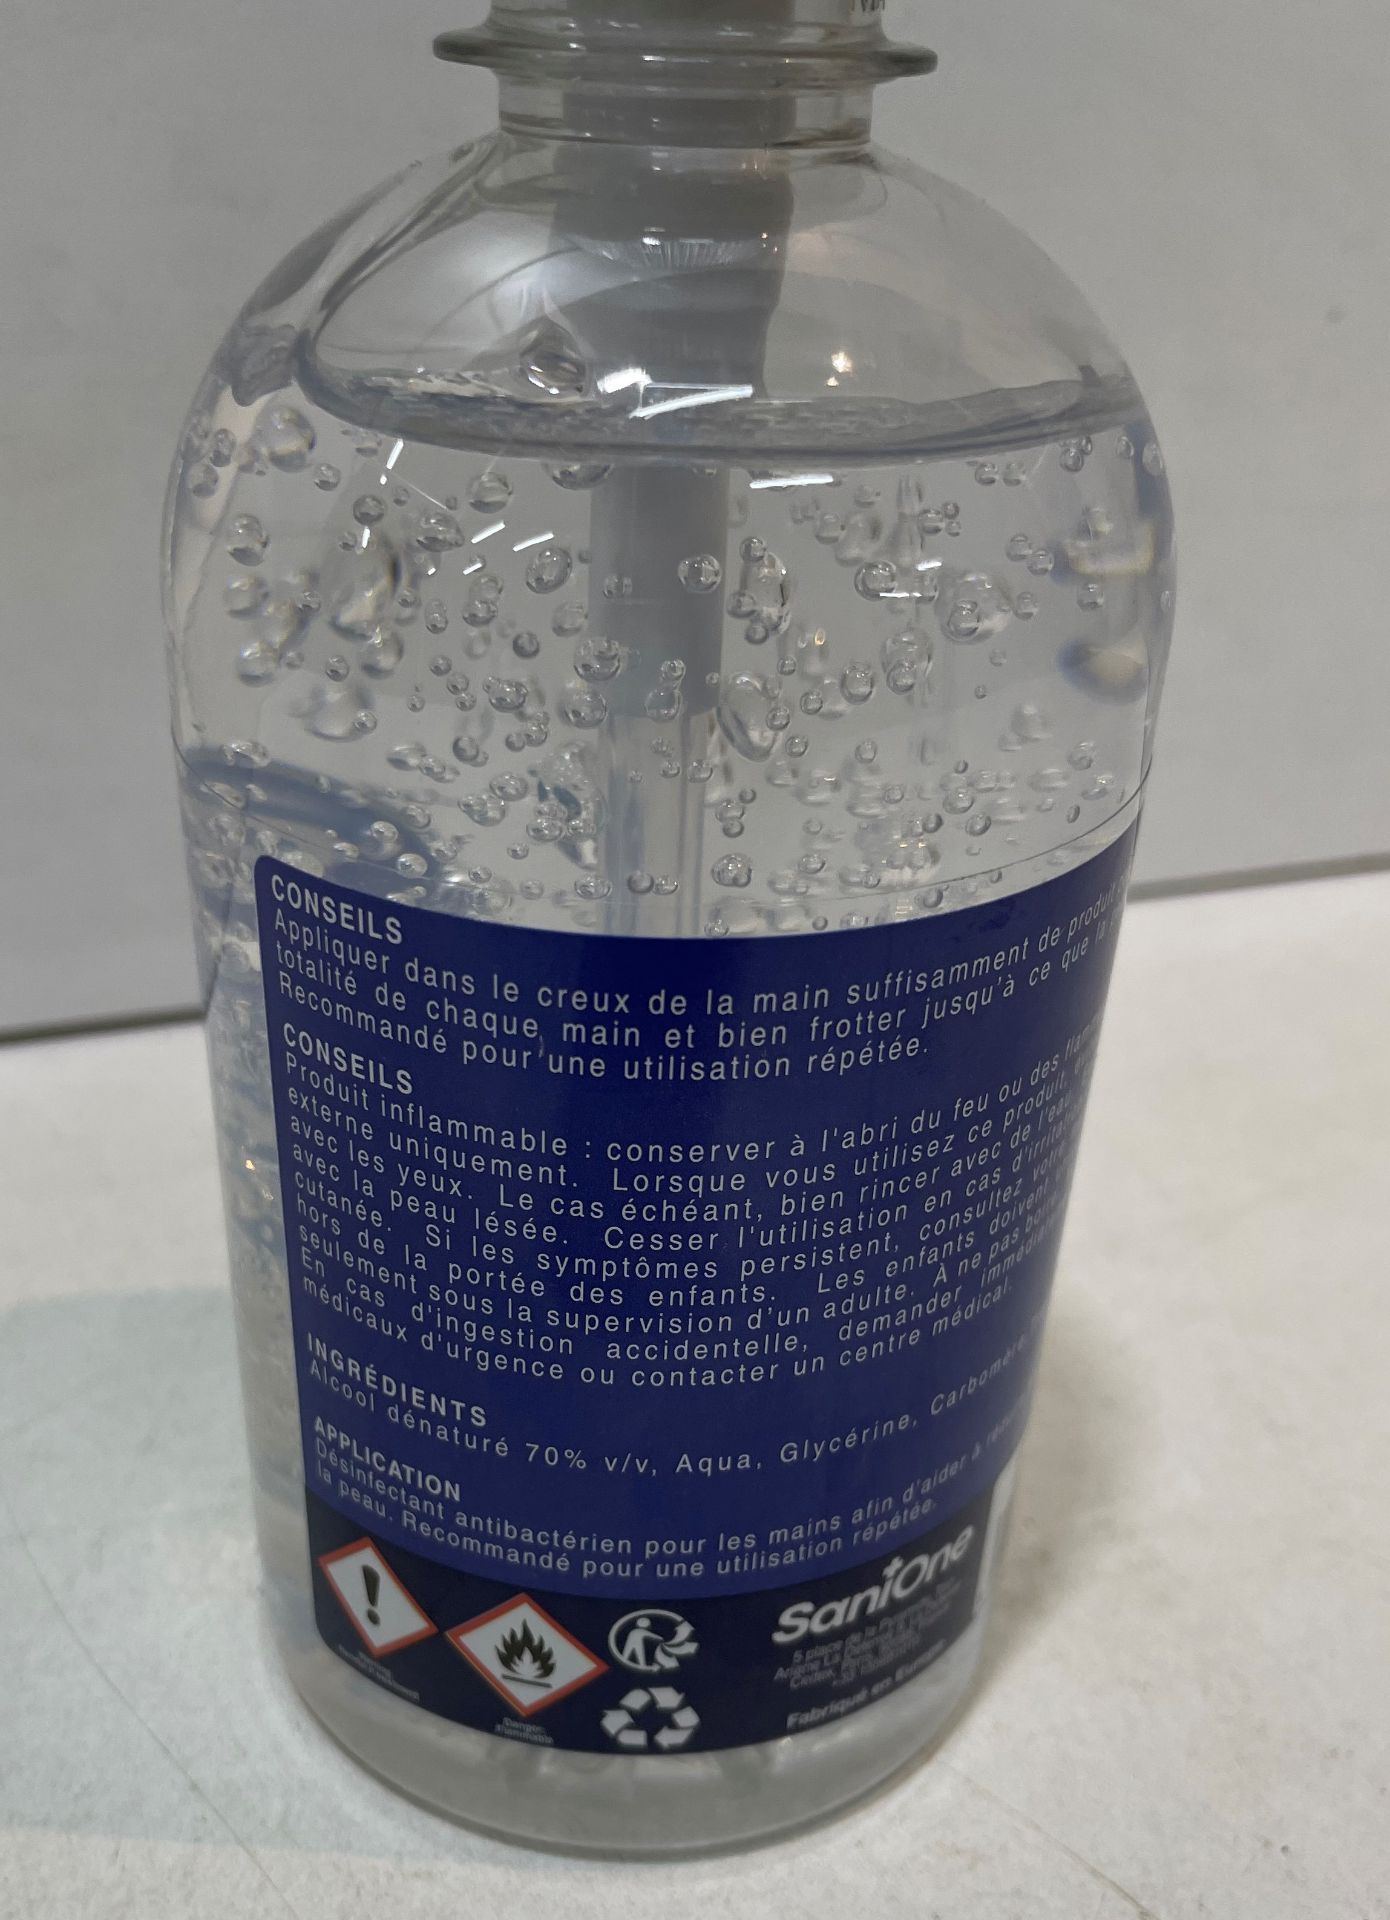 Approximately 1440 500ml Instant Hand Sanitizer Gel |****Instructions are FRENCH**** - Image 7 of 10